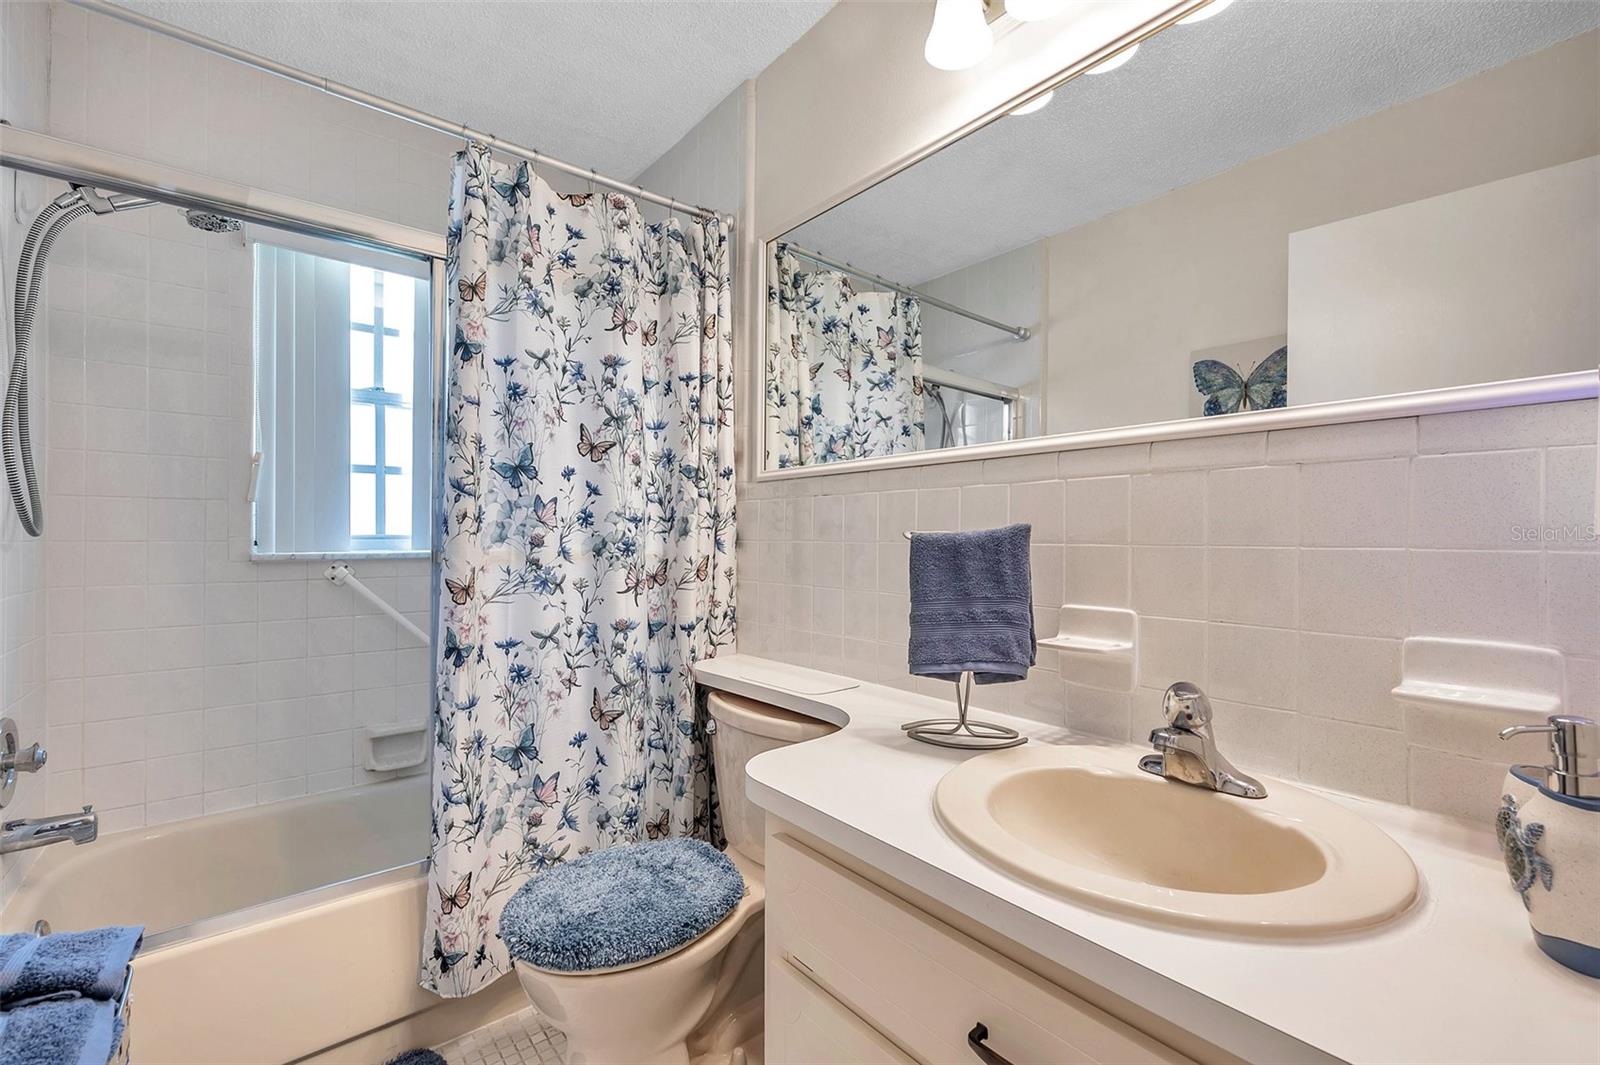 Guest bathroom has a tub with shower, window and single vanity.